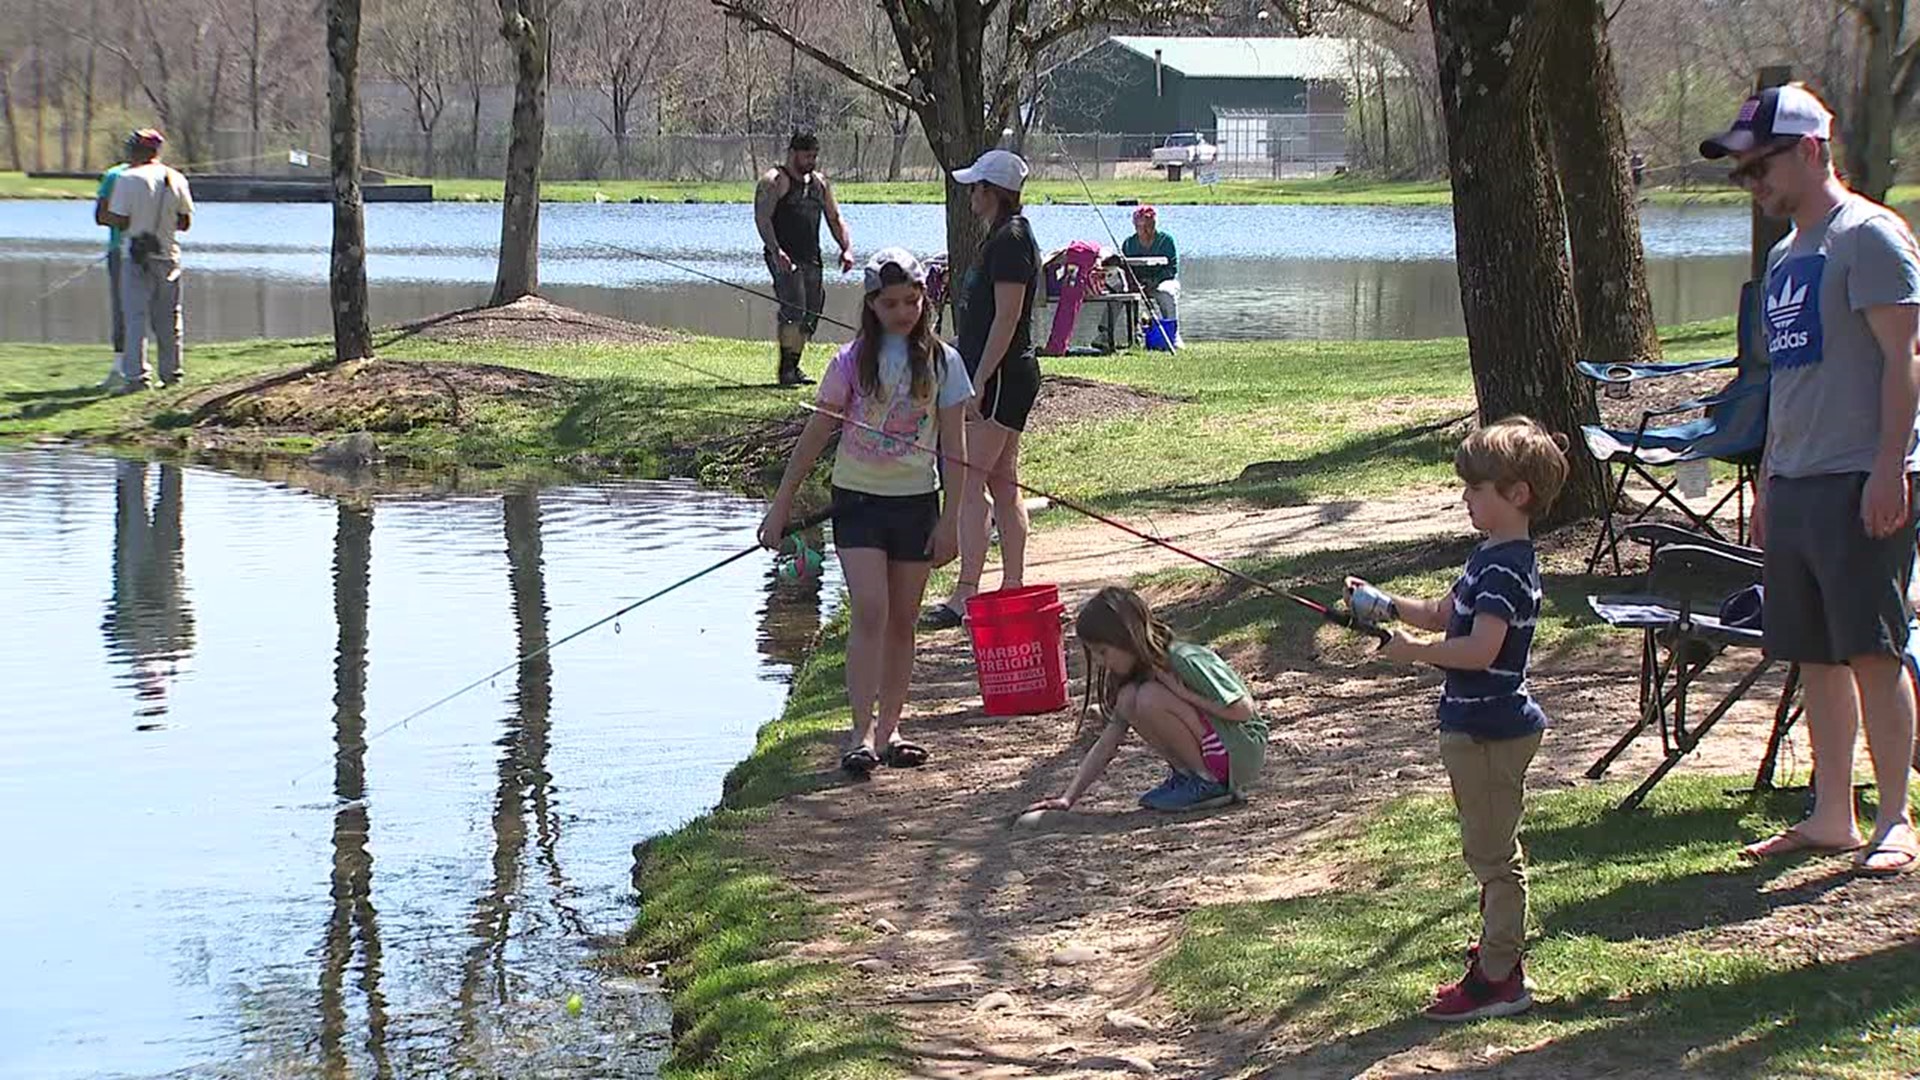 Many people in the Poconos took advantage of the warm weather.